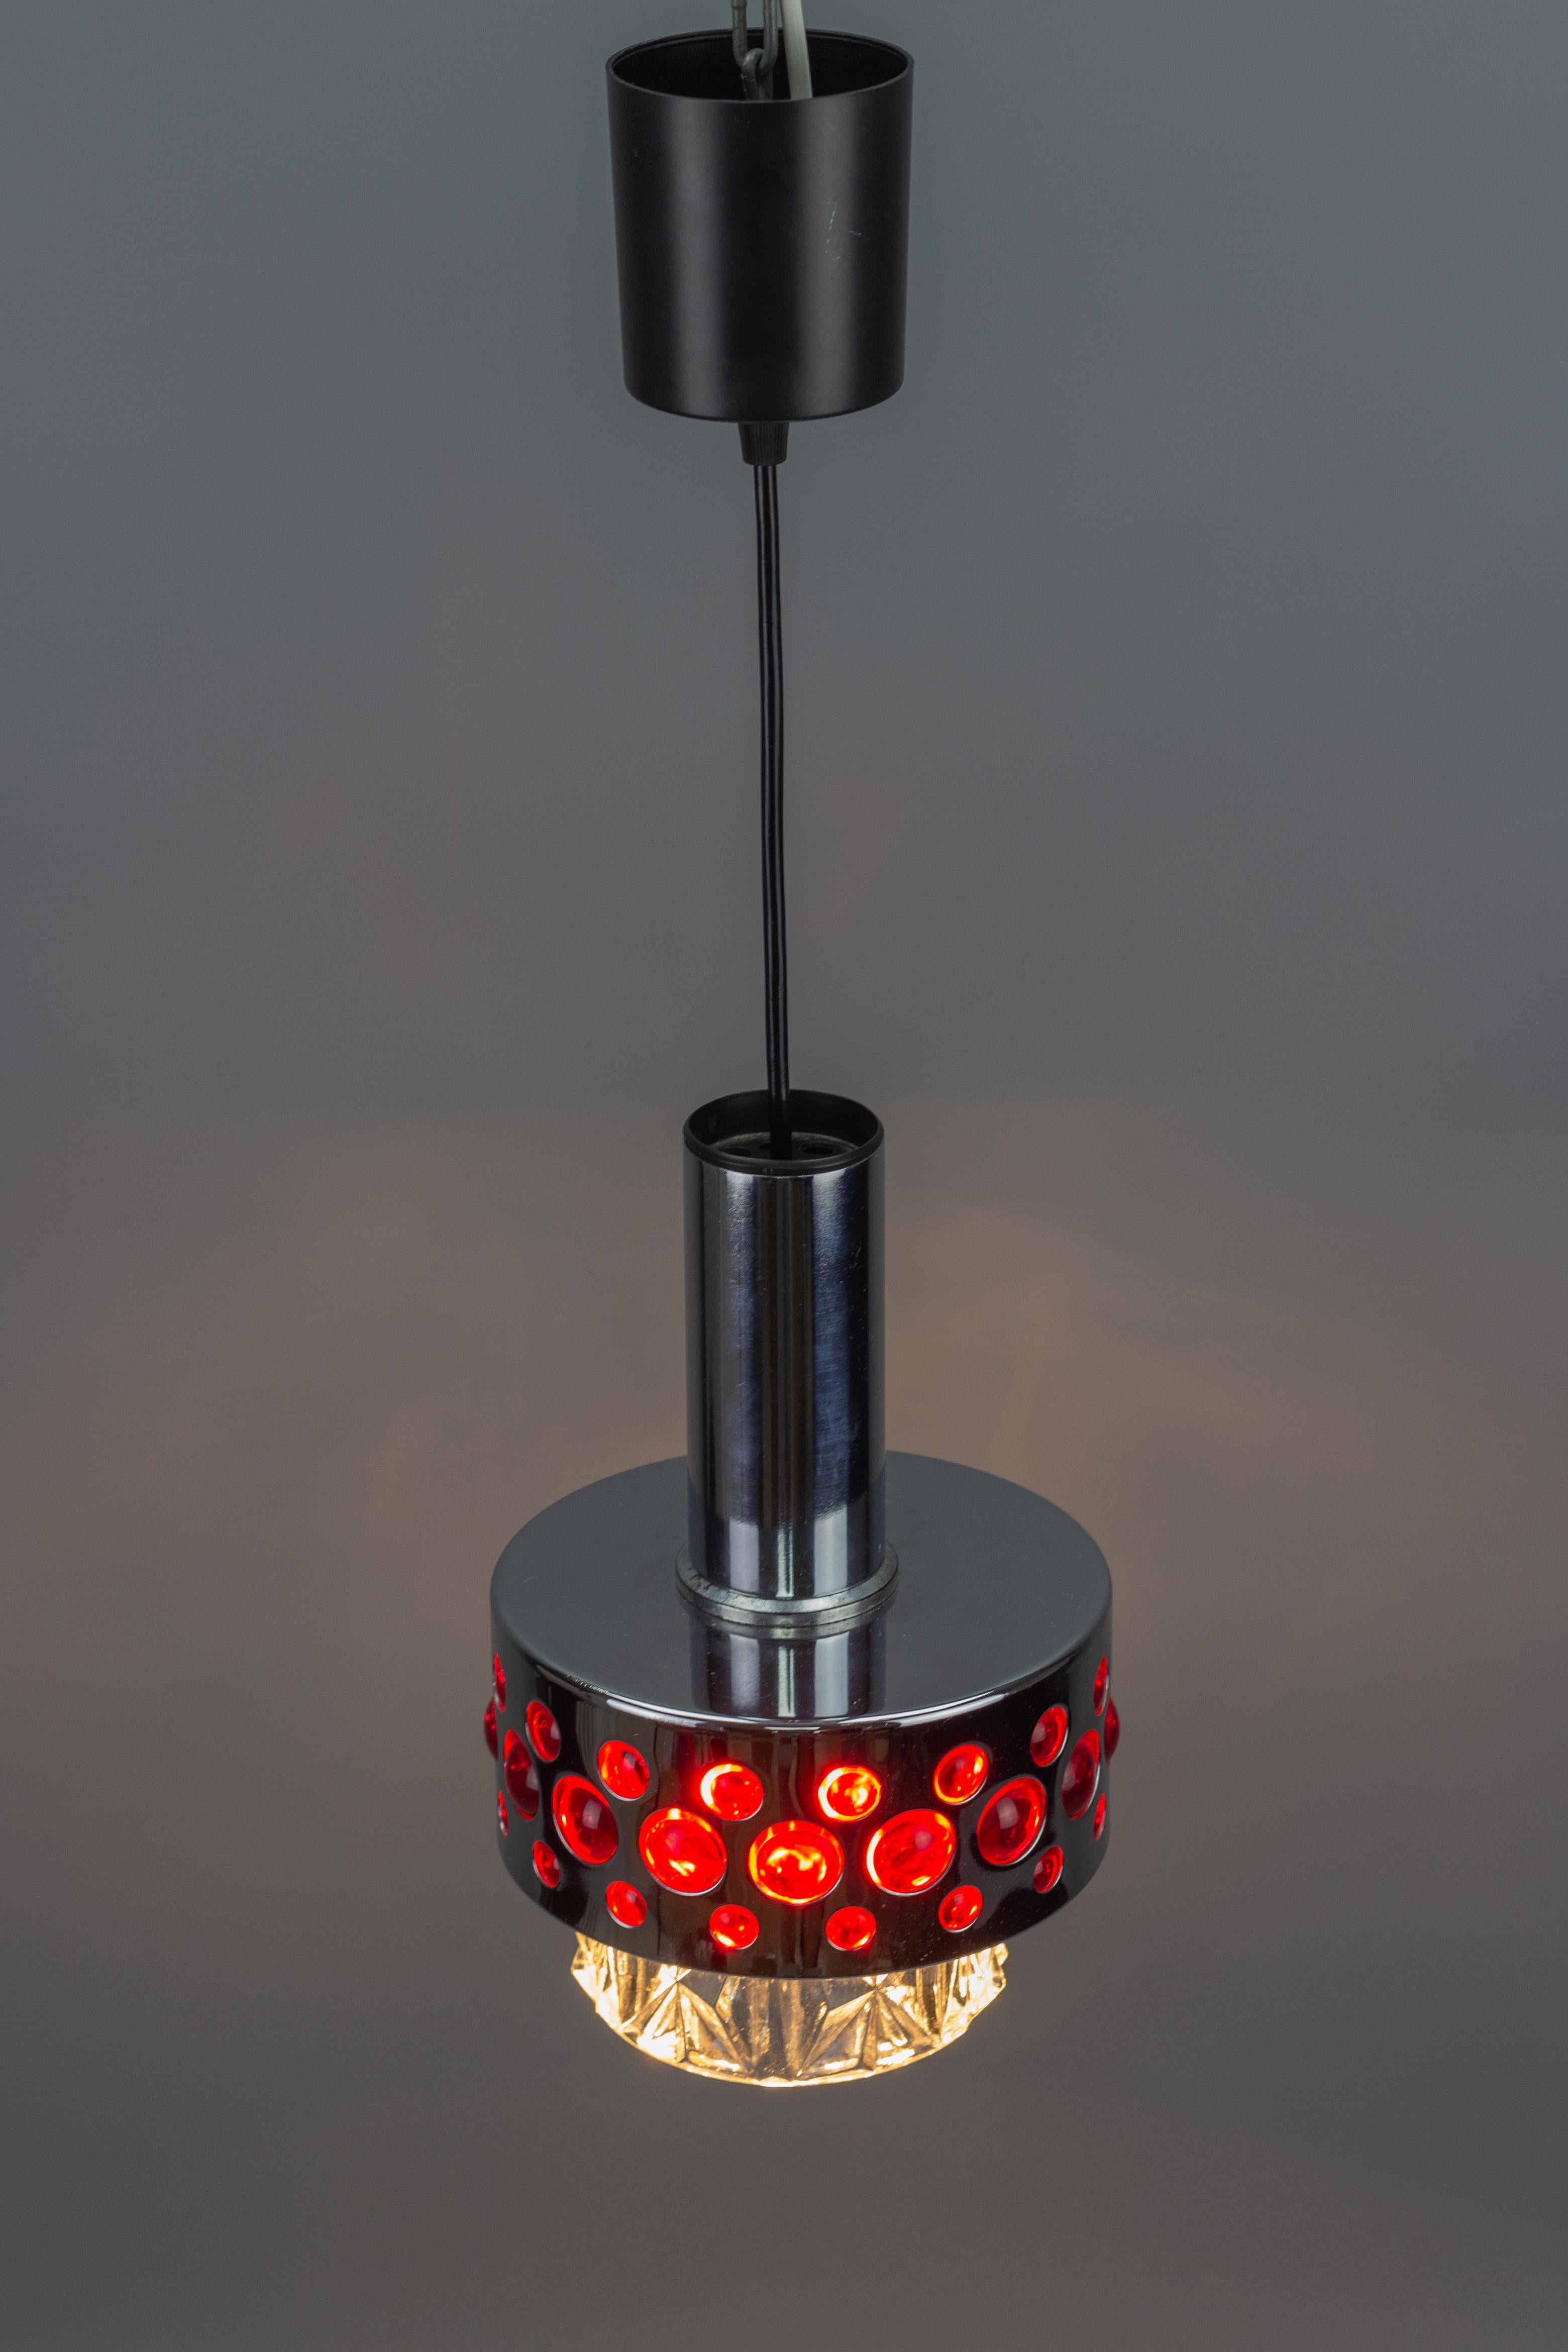 German Mid-Century Modern Chrome and Red Pendant Light by Richard Essig, 1970s For Sale 1